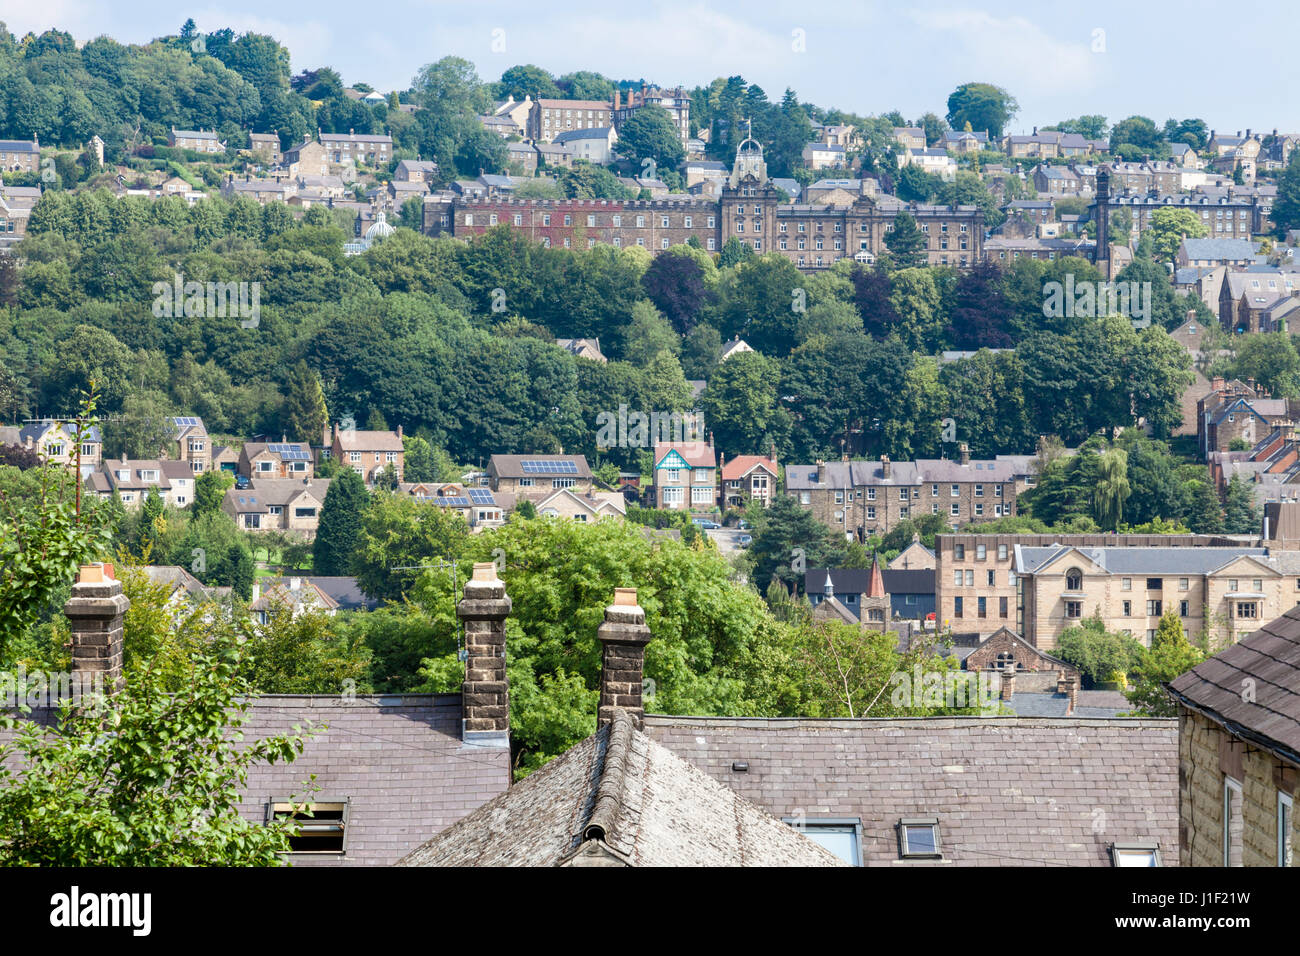 English hillside town. View over Matlock from the surrounding hills, Derbyshire, England, UK Stock Photo